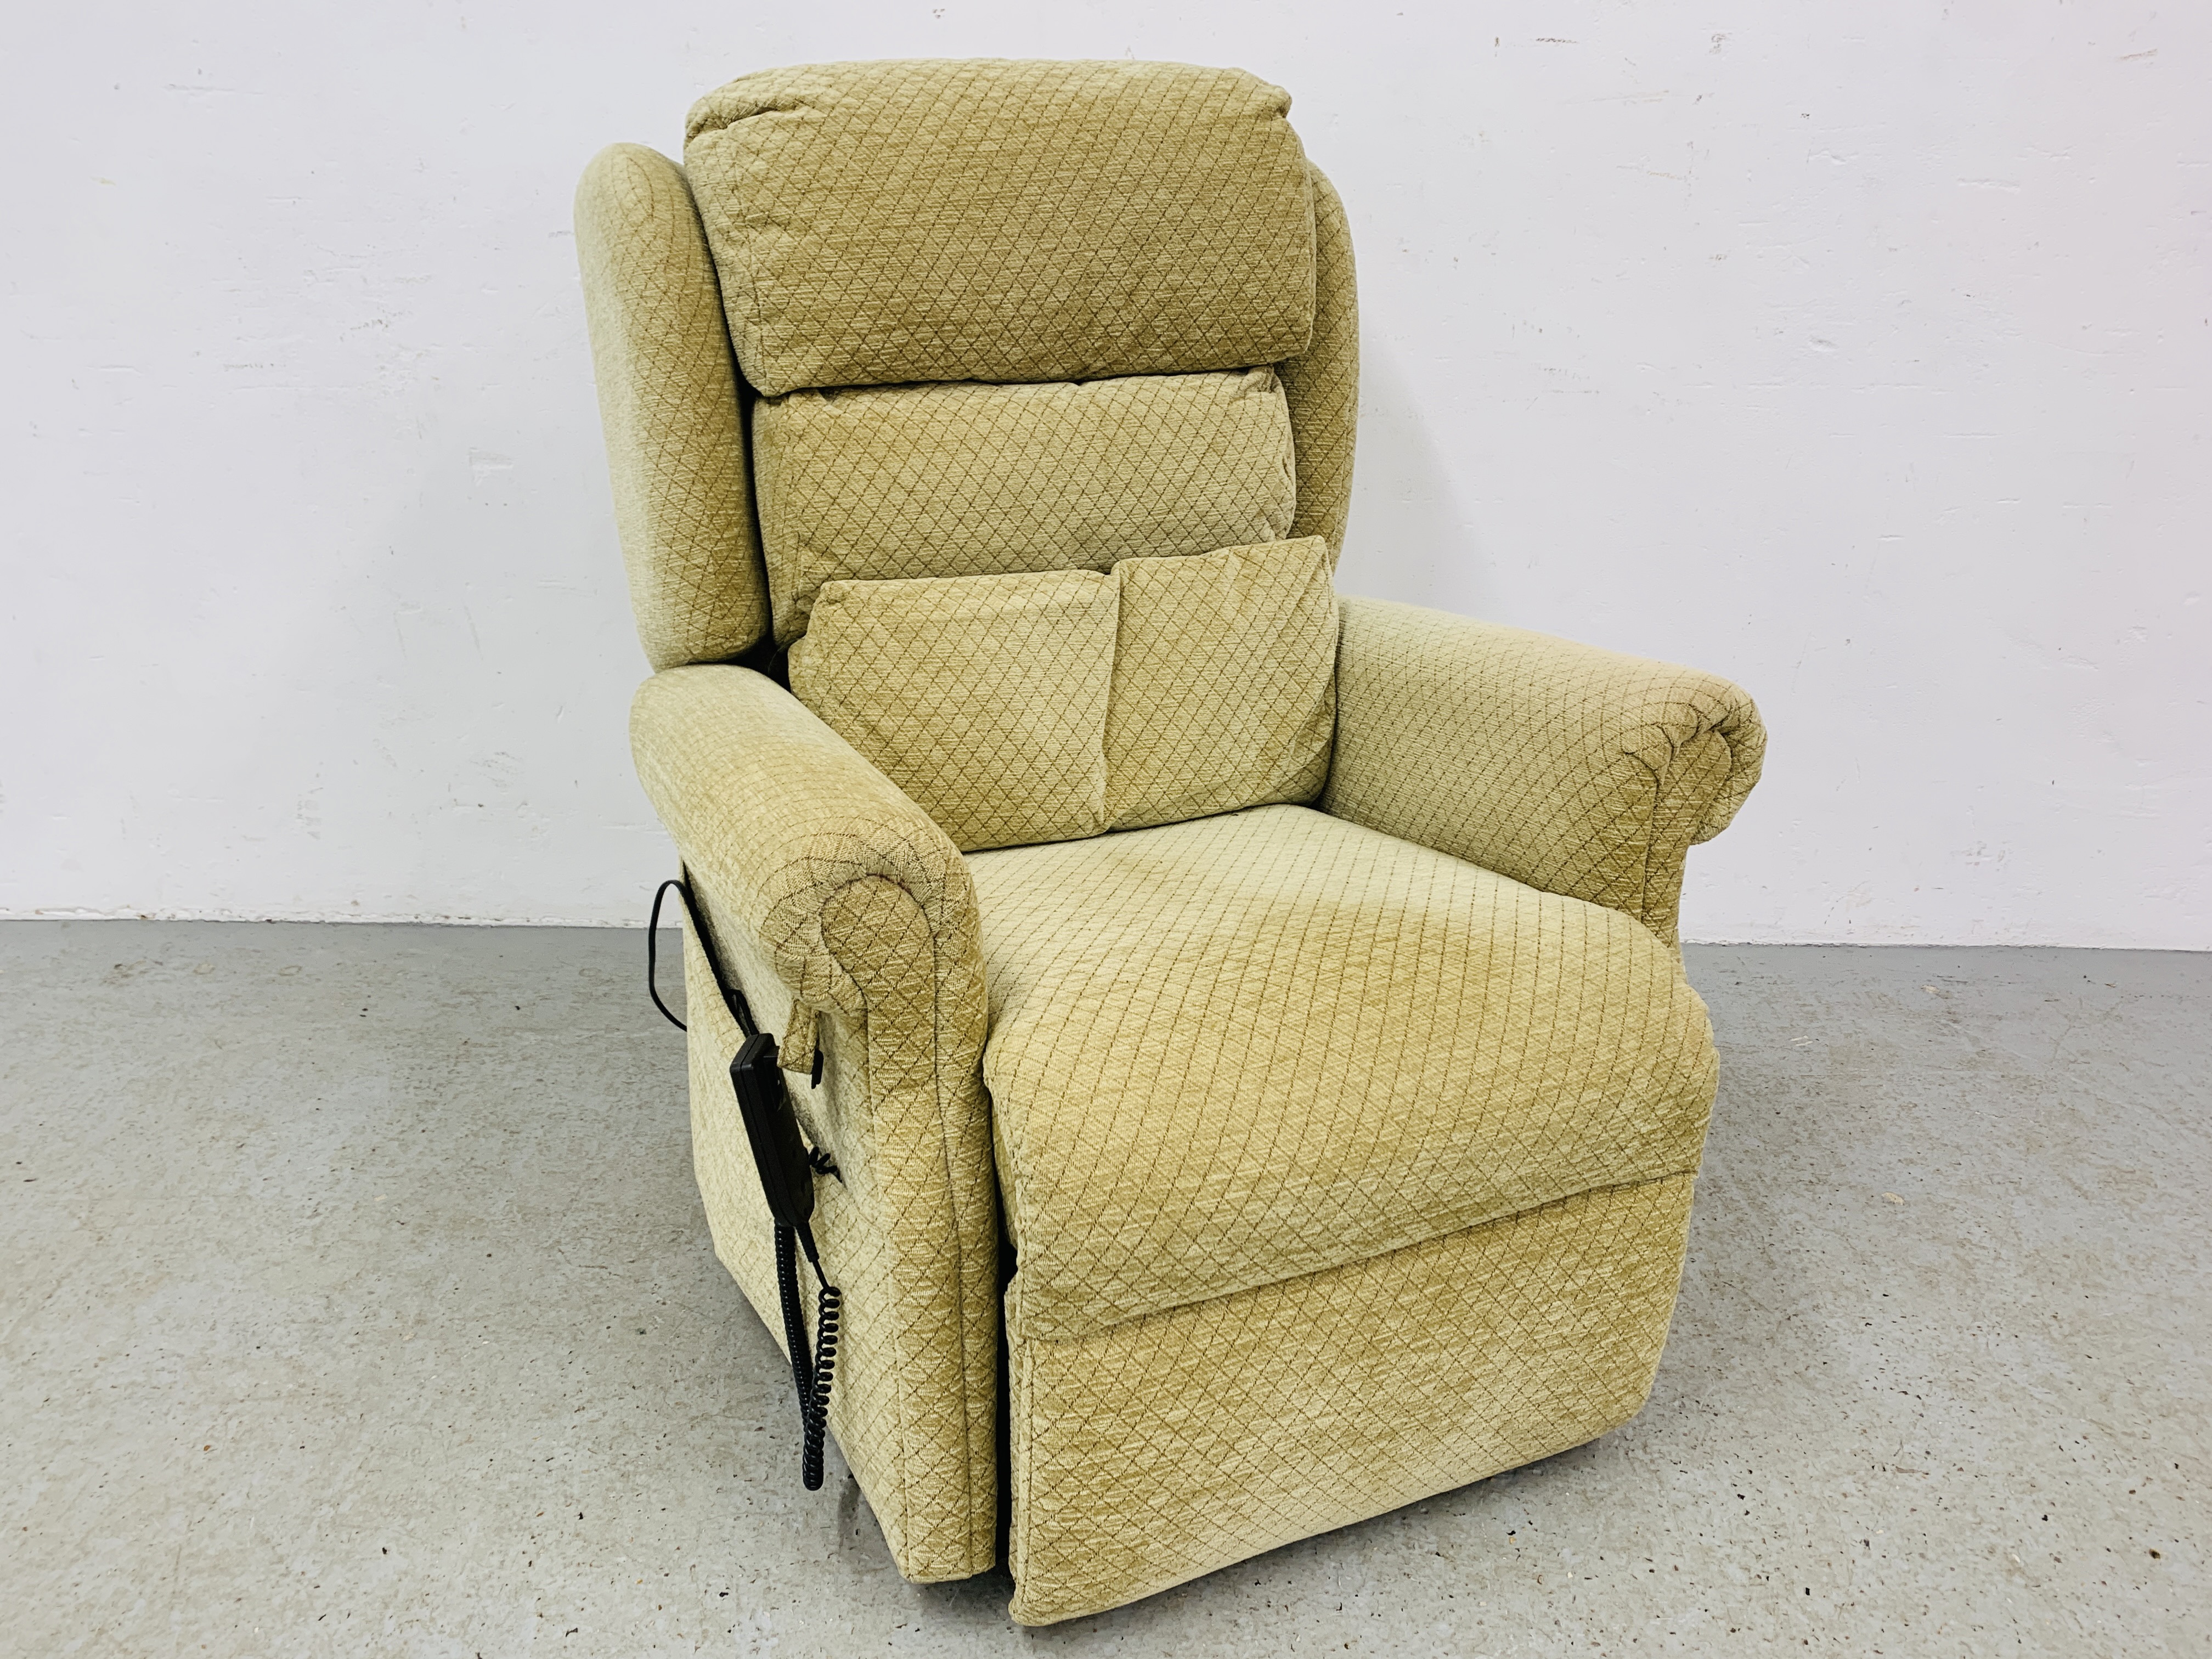 ELECTRIC RISE AND RECLINE ARMCHAIR - SOLD AS SEEN